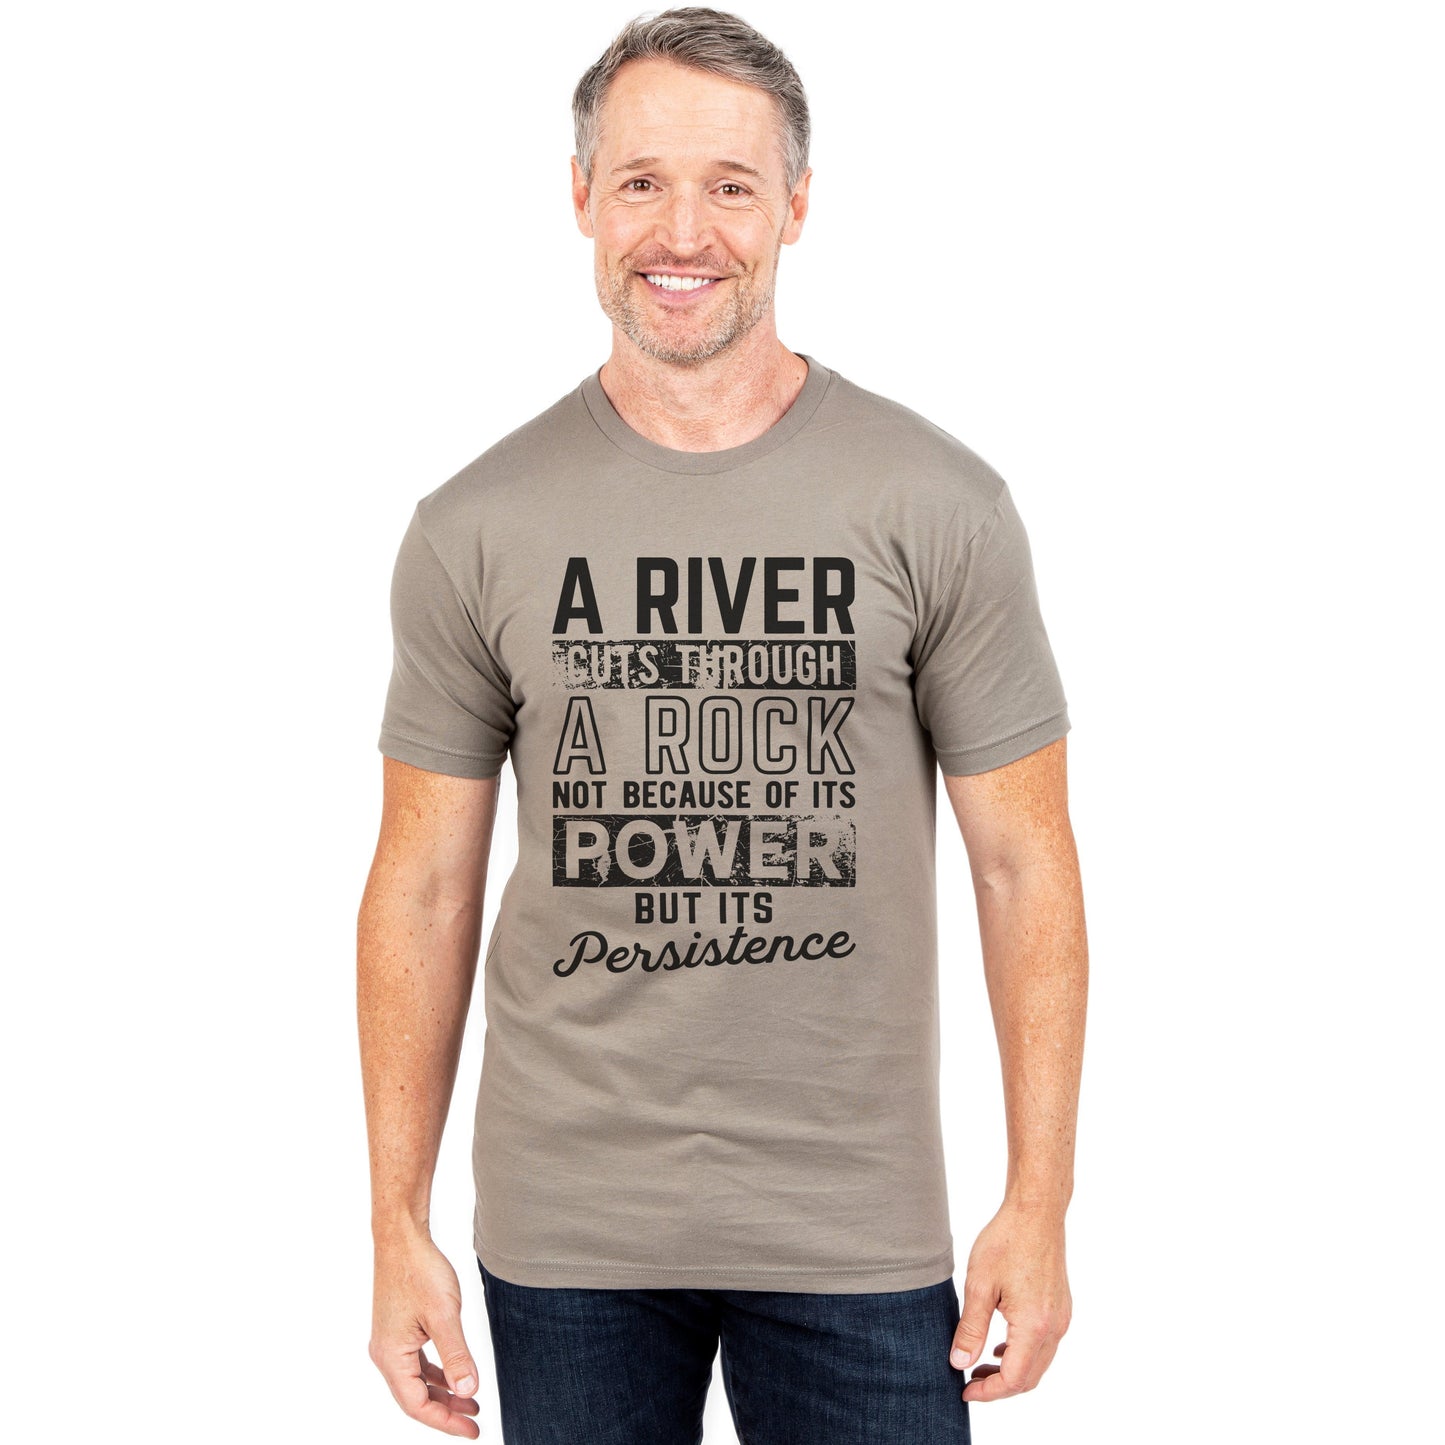 A River Cuts Through A Rock Not Because Of It's Power But It's Persistence Military Grey Printed Graphic Men's Crew T-Shirt Tee Model